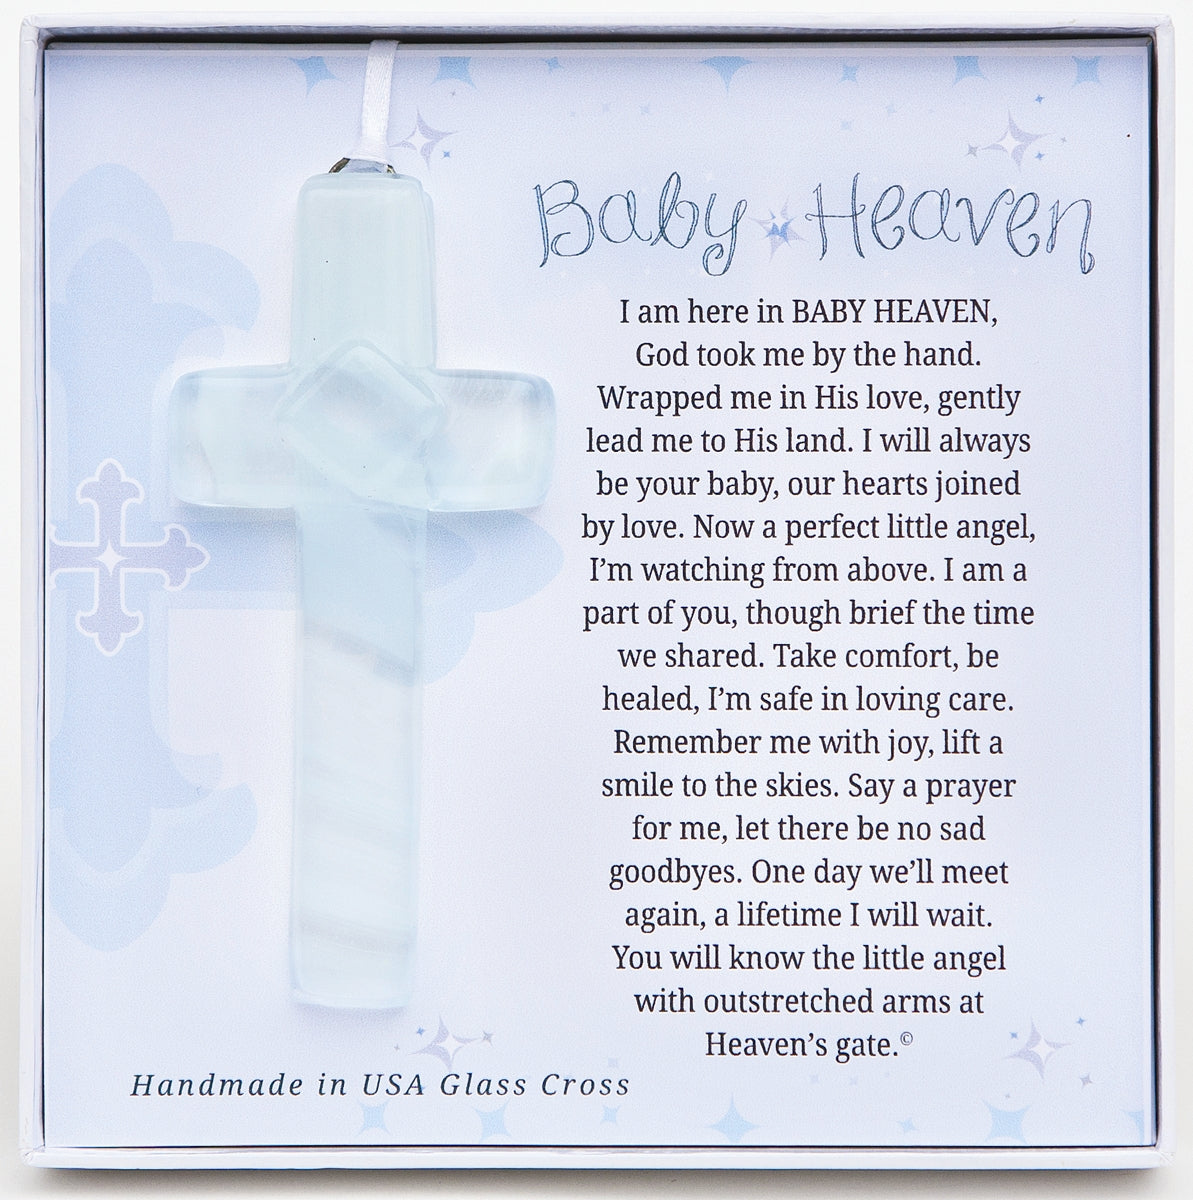 4&quot; handmade clear hanging glass cross with Baby Heaven poem printed on cardstock in white gift box with clear lid.